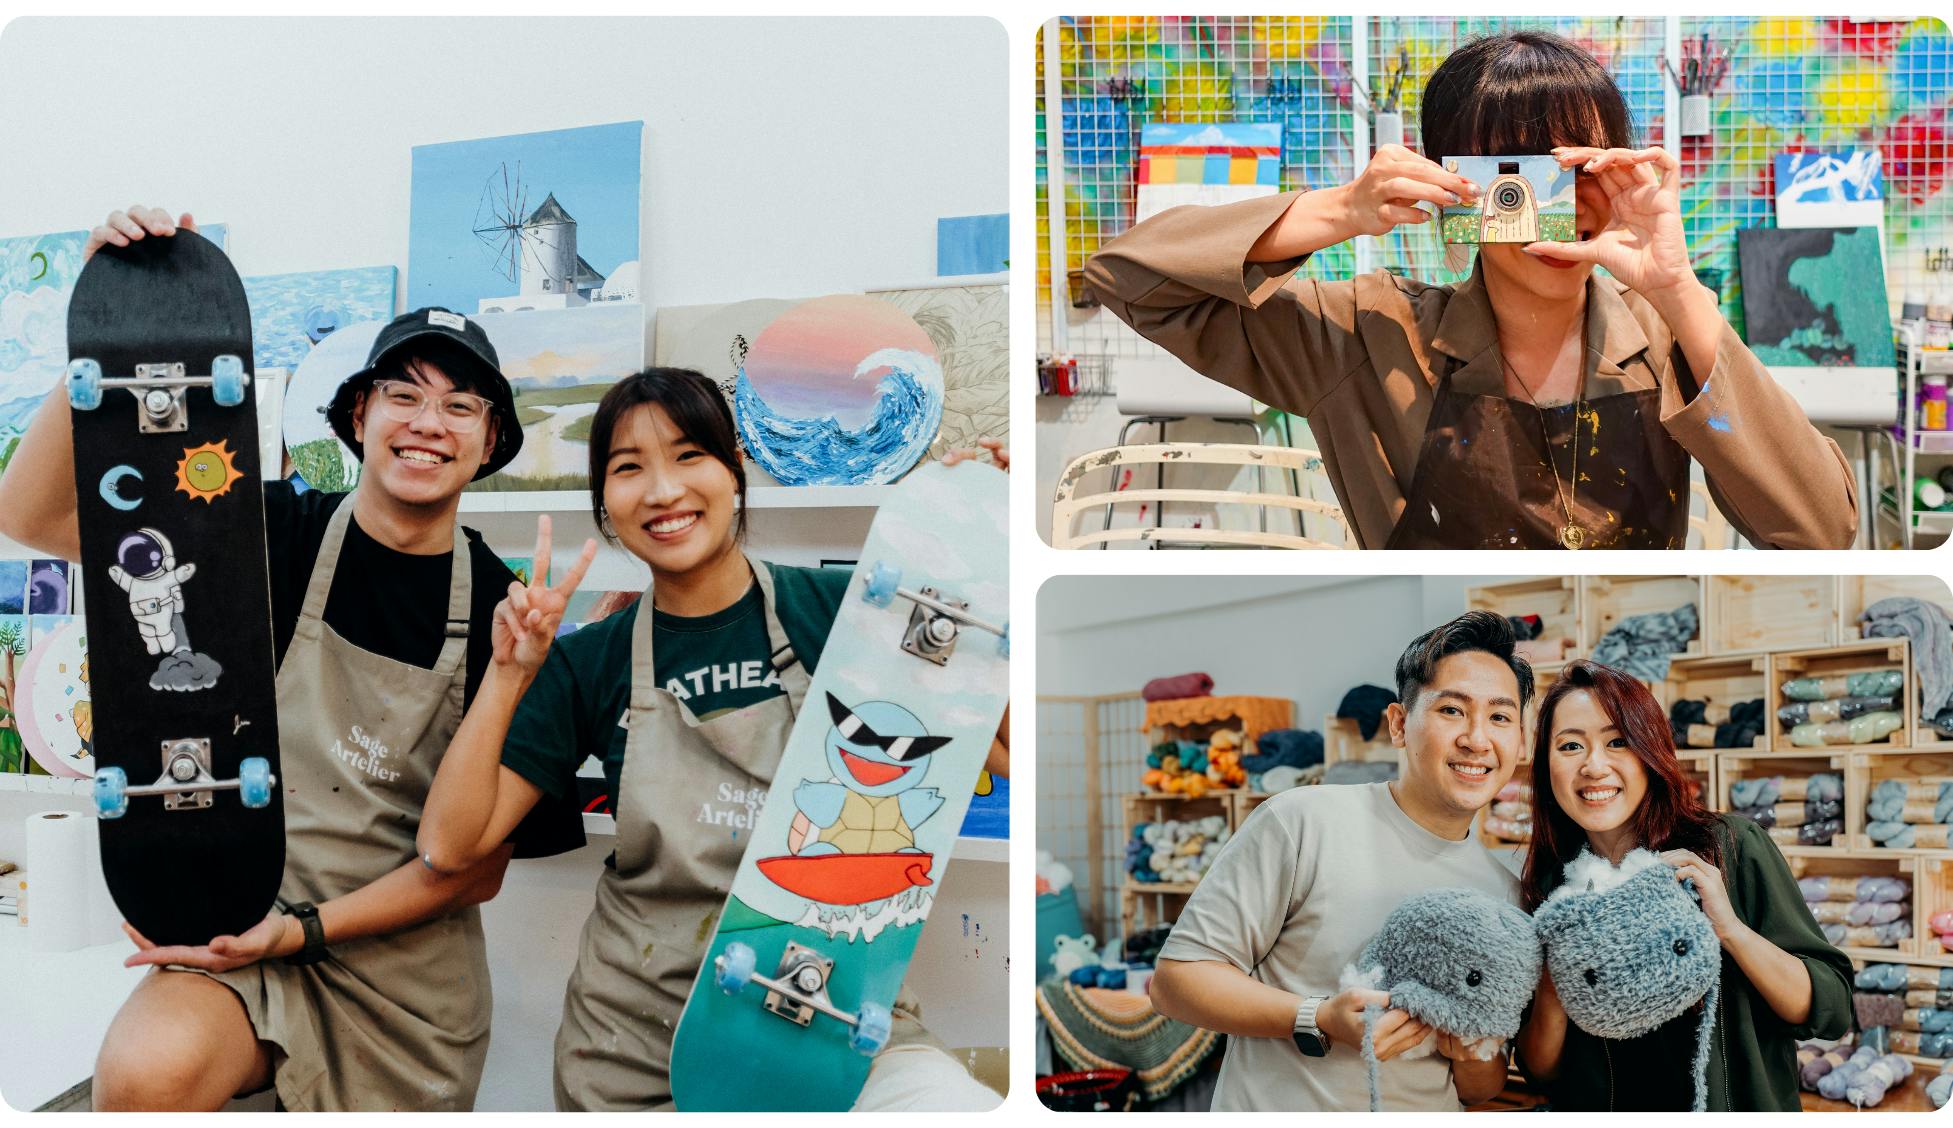 Do a quirky workshop like paint a skateboard, your own camera or make a plushie!